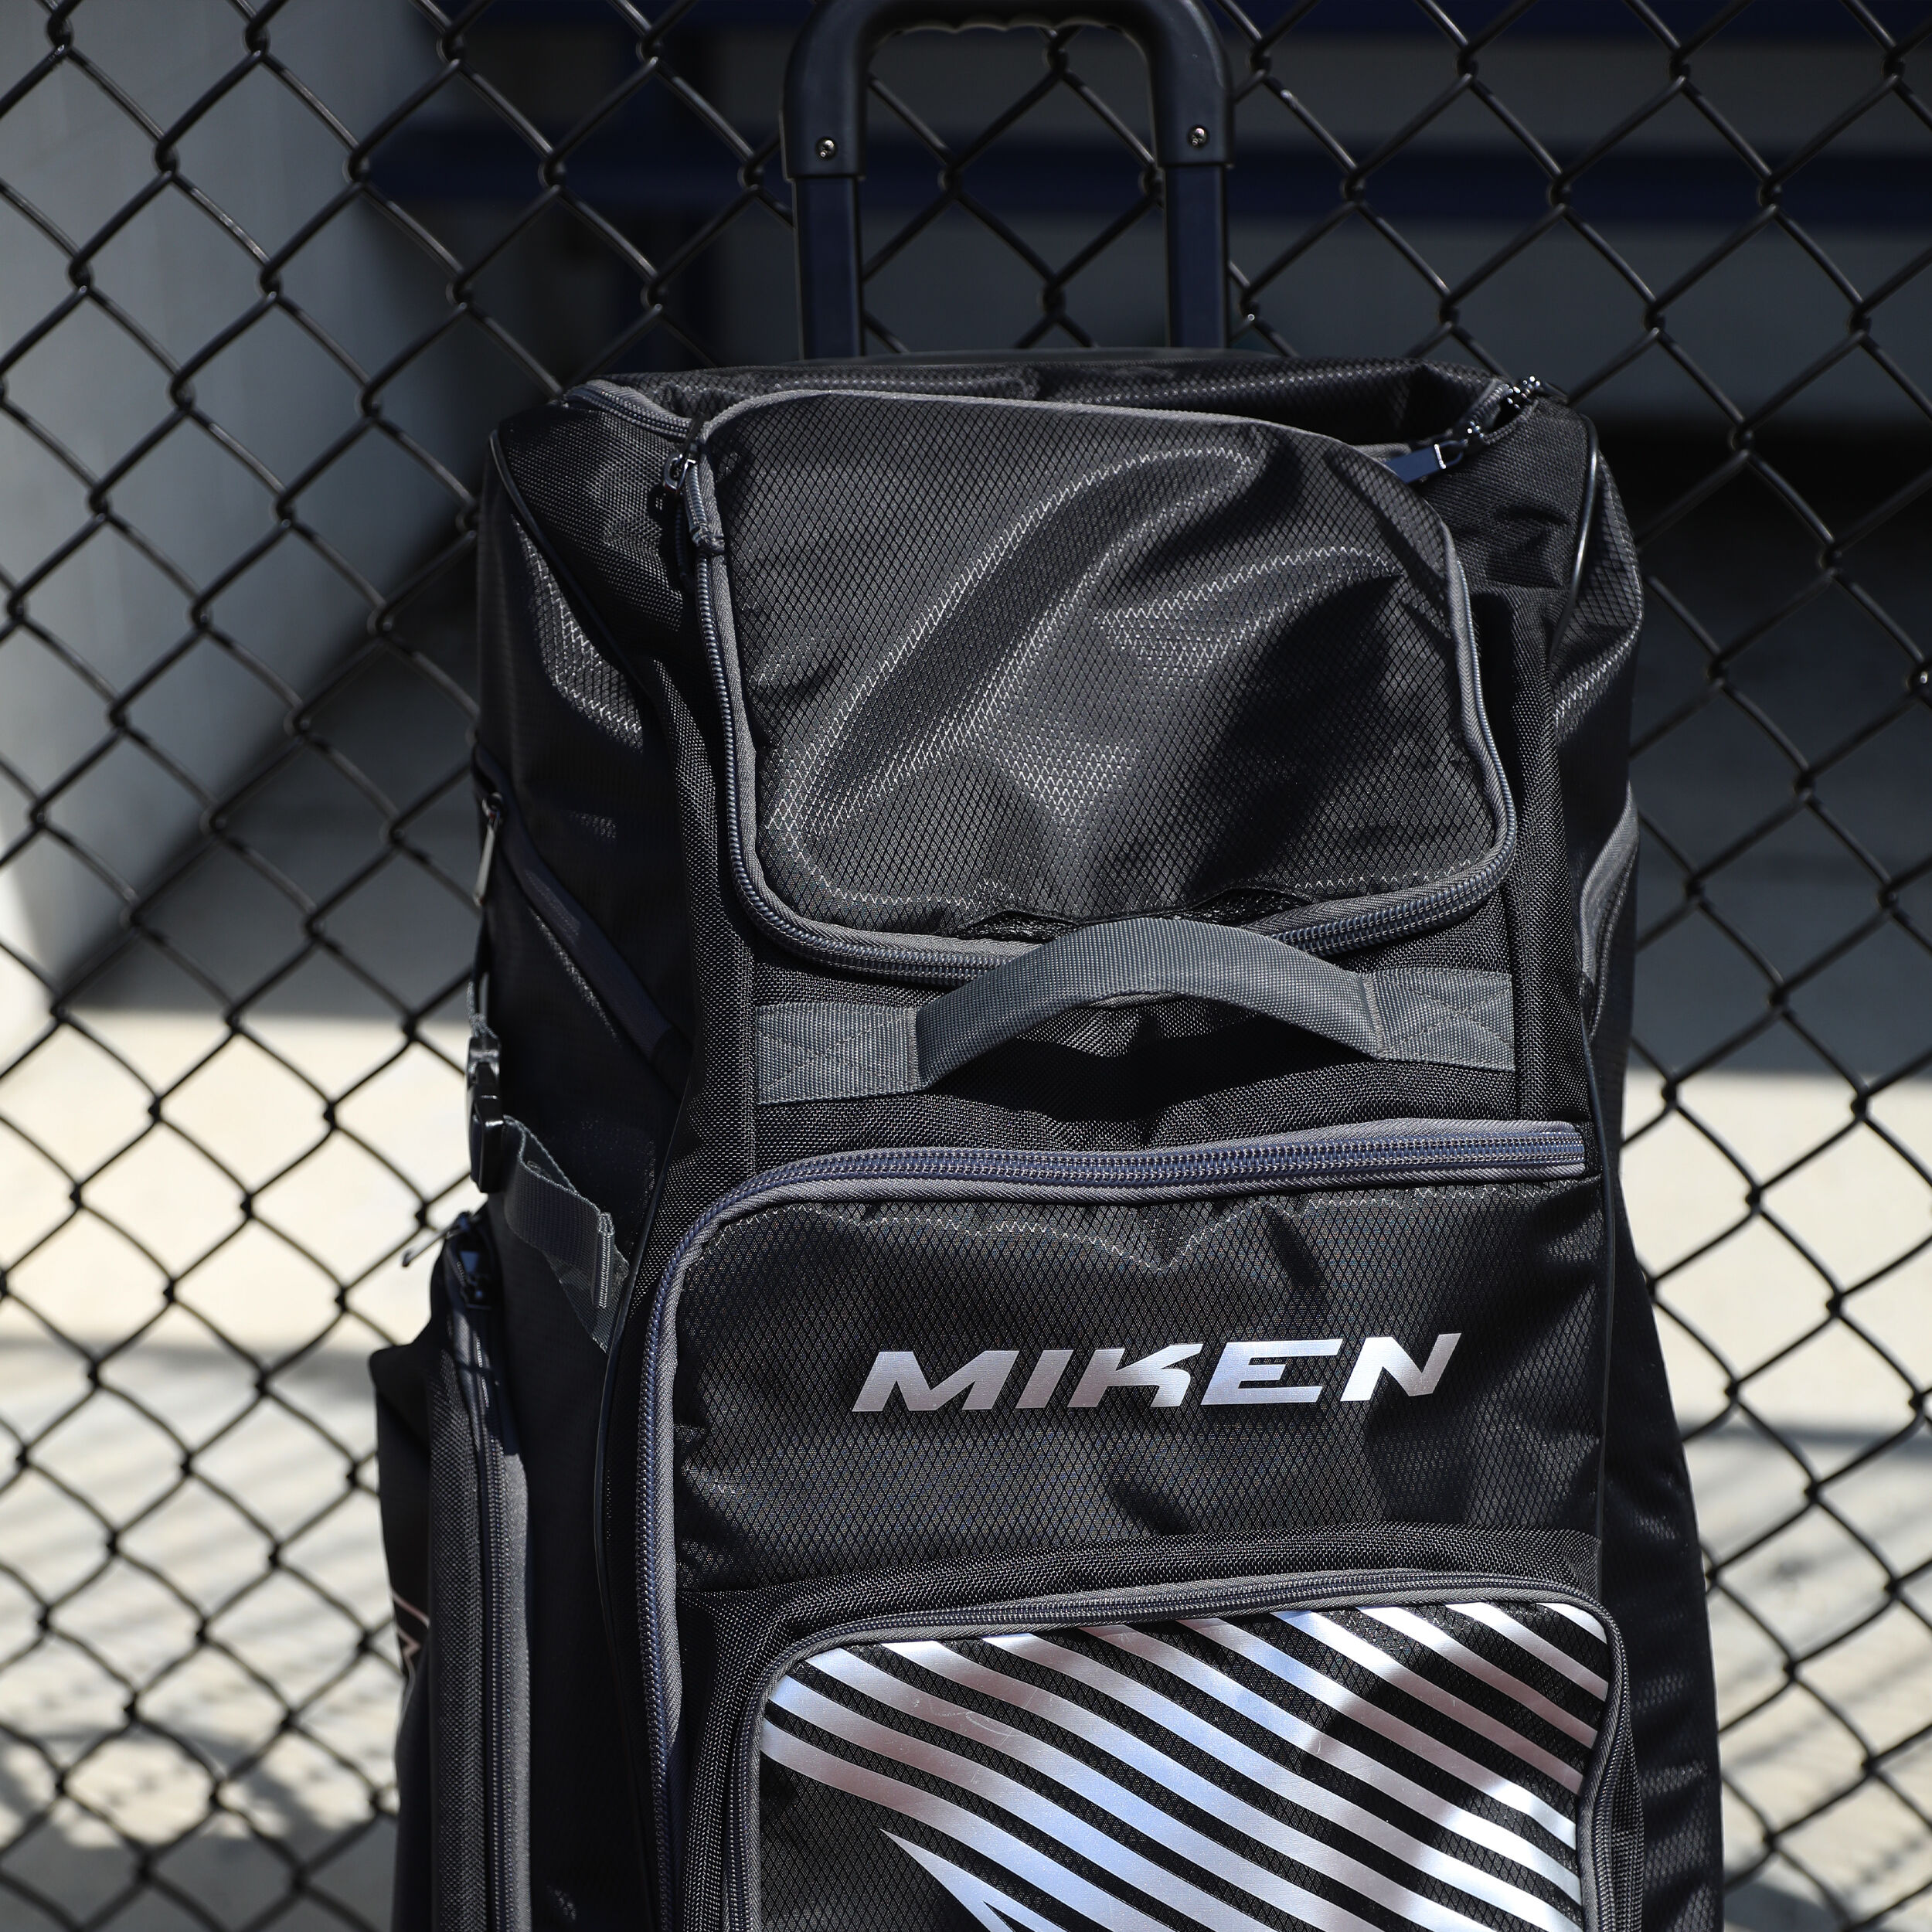 MBA005 Miken Deluxe Wheeled Slowpitch Bag Black